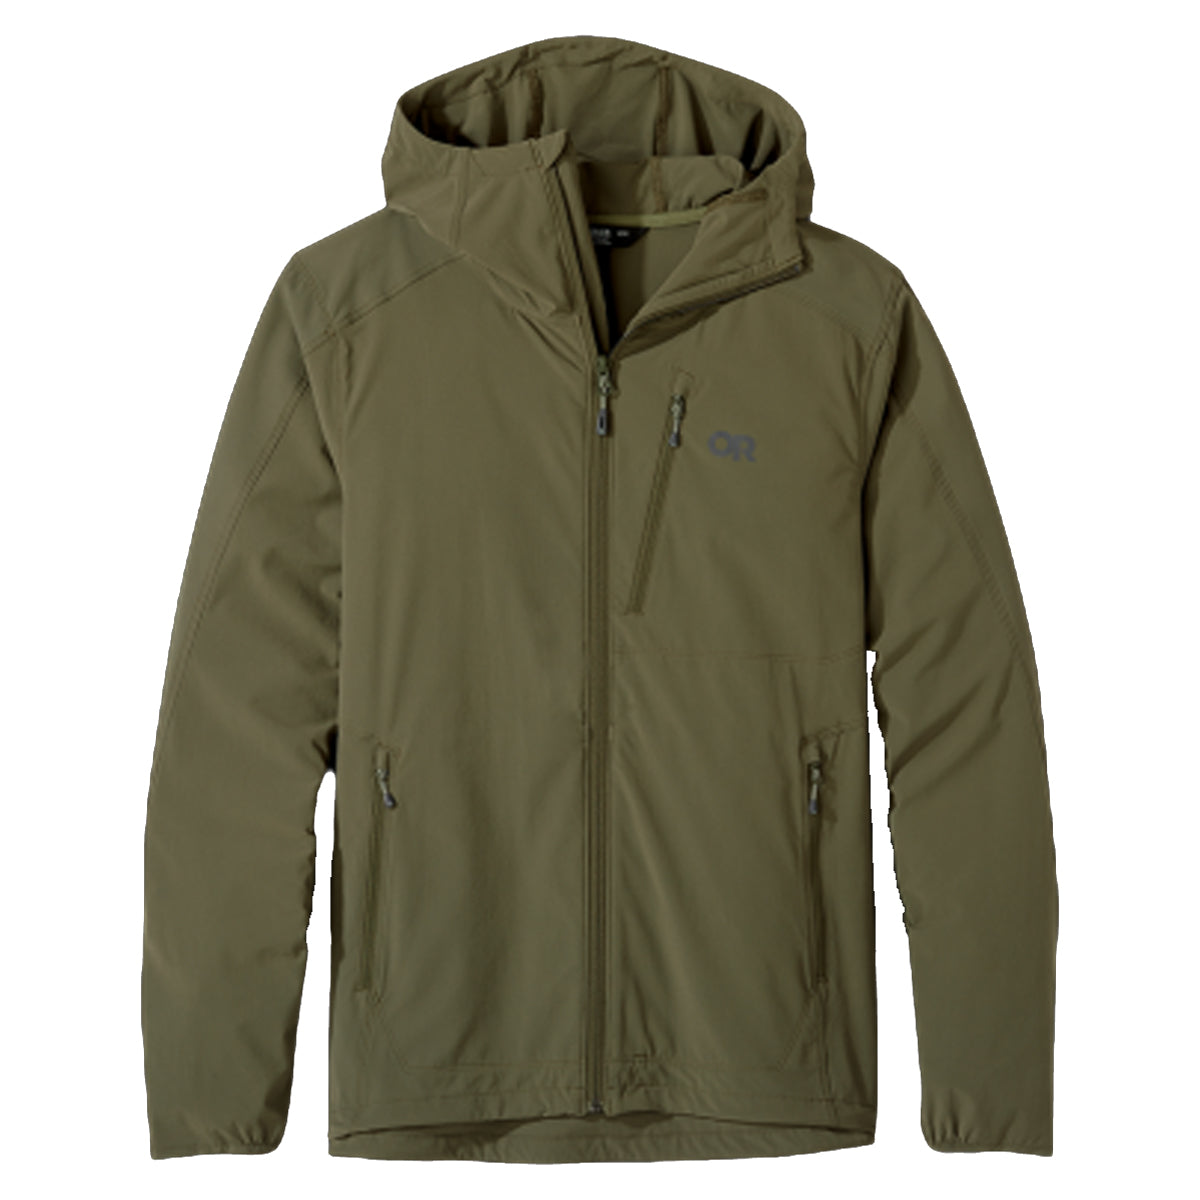 Outdoor Research Ferrosi Hoodie in Fatigue by GOHUNT | Outdoor Research - GOHUNT Shop